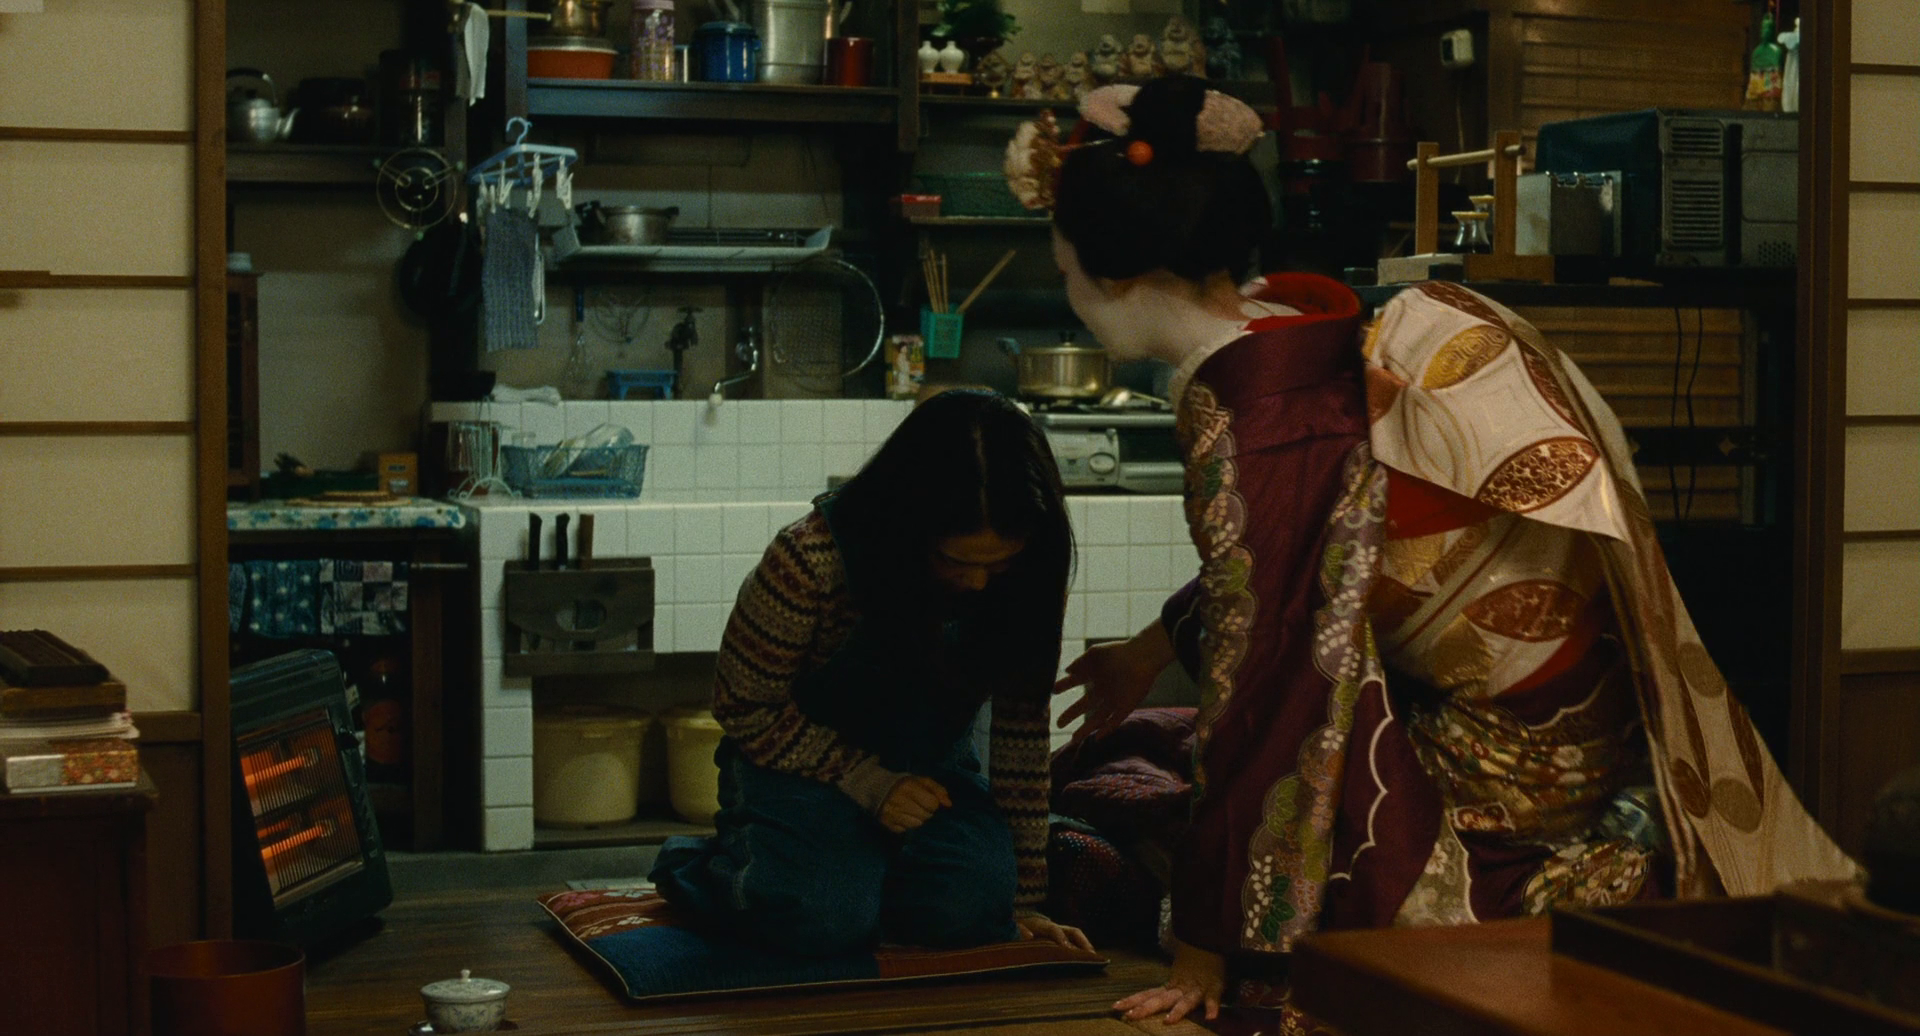  Lady.Maiko.2014.JAPANESE.1080p.BluRay.DTS.x264-WiKi 18.50GB-4.png